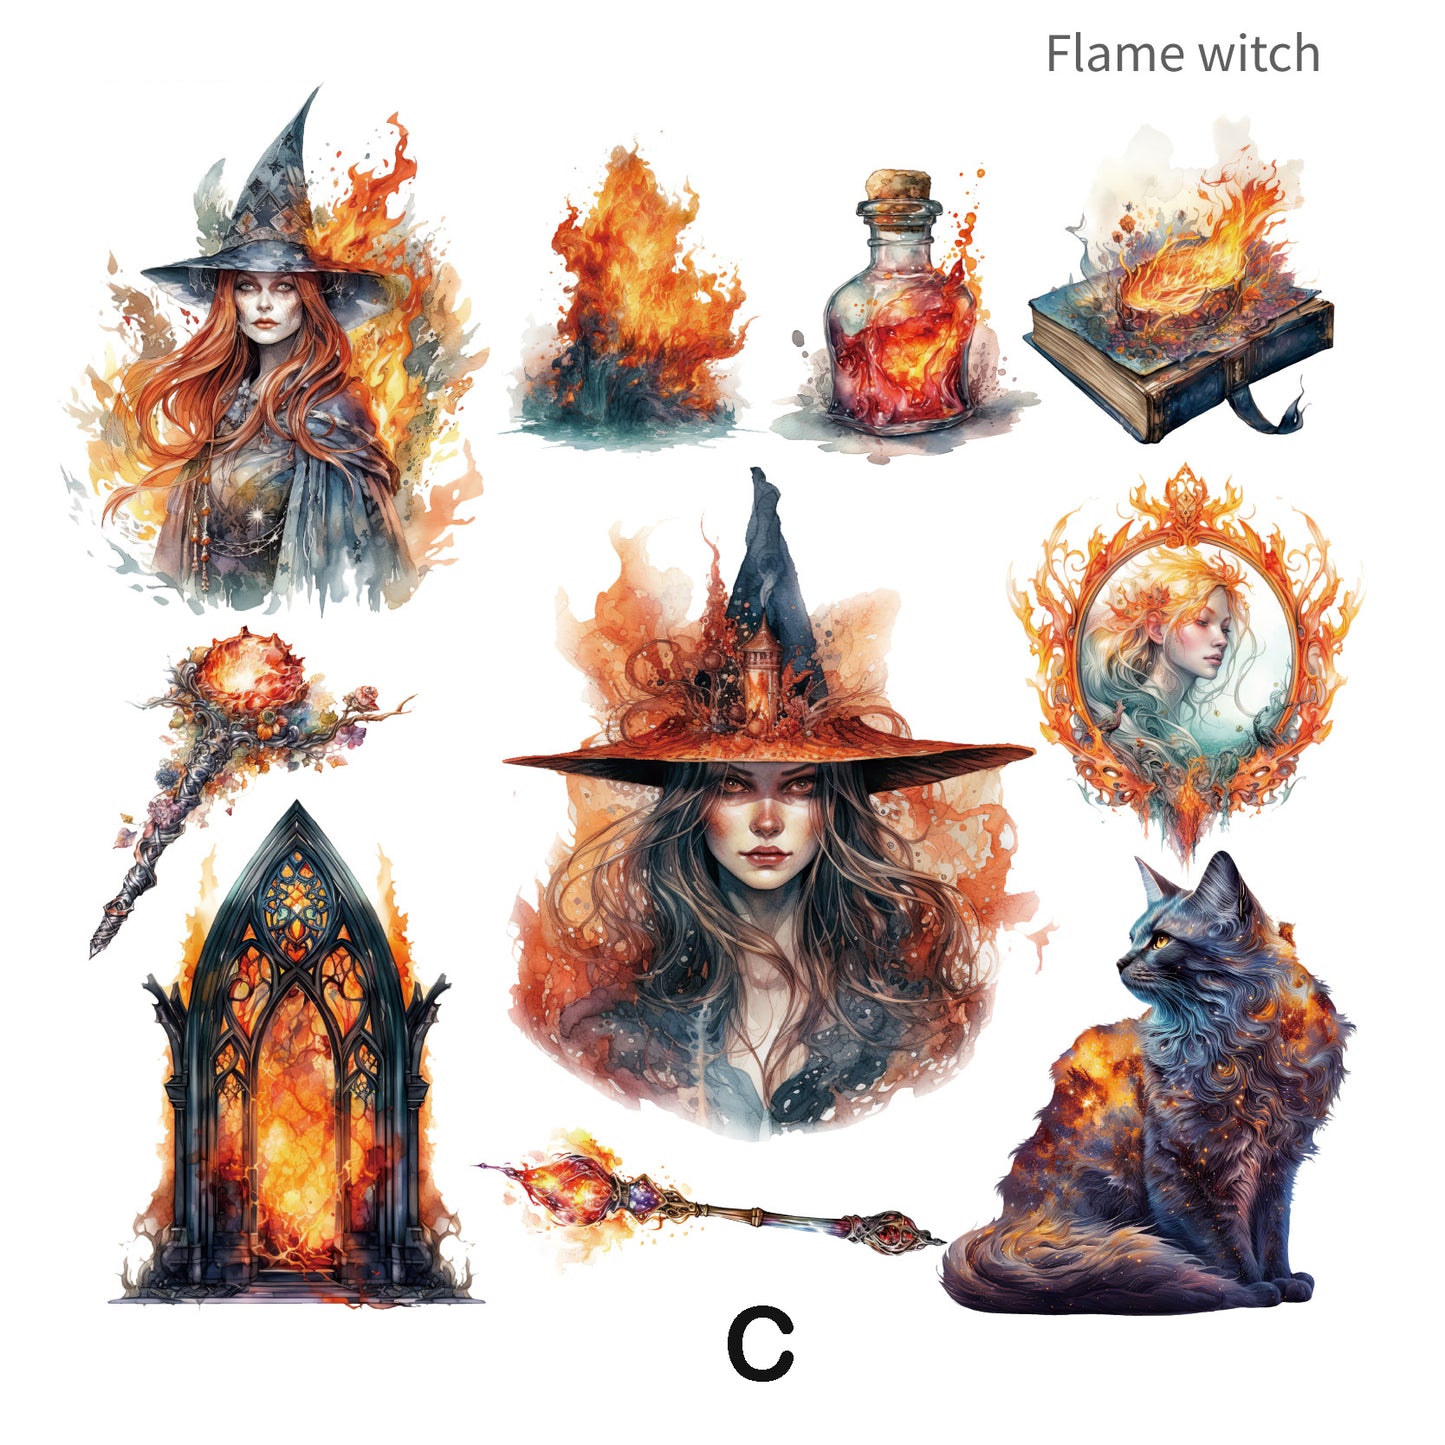 Gothic Witch Series Stickers 20pcs